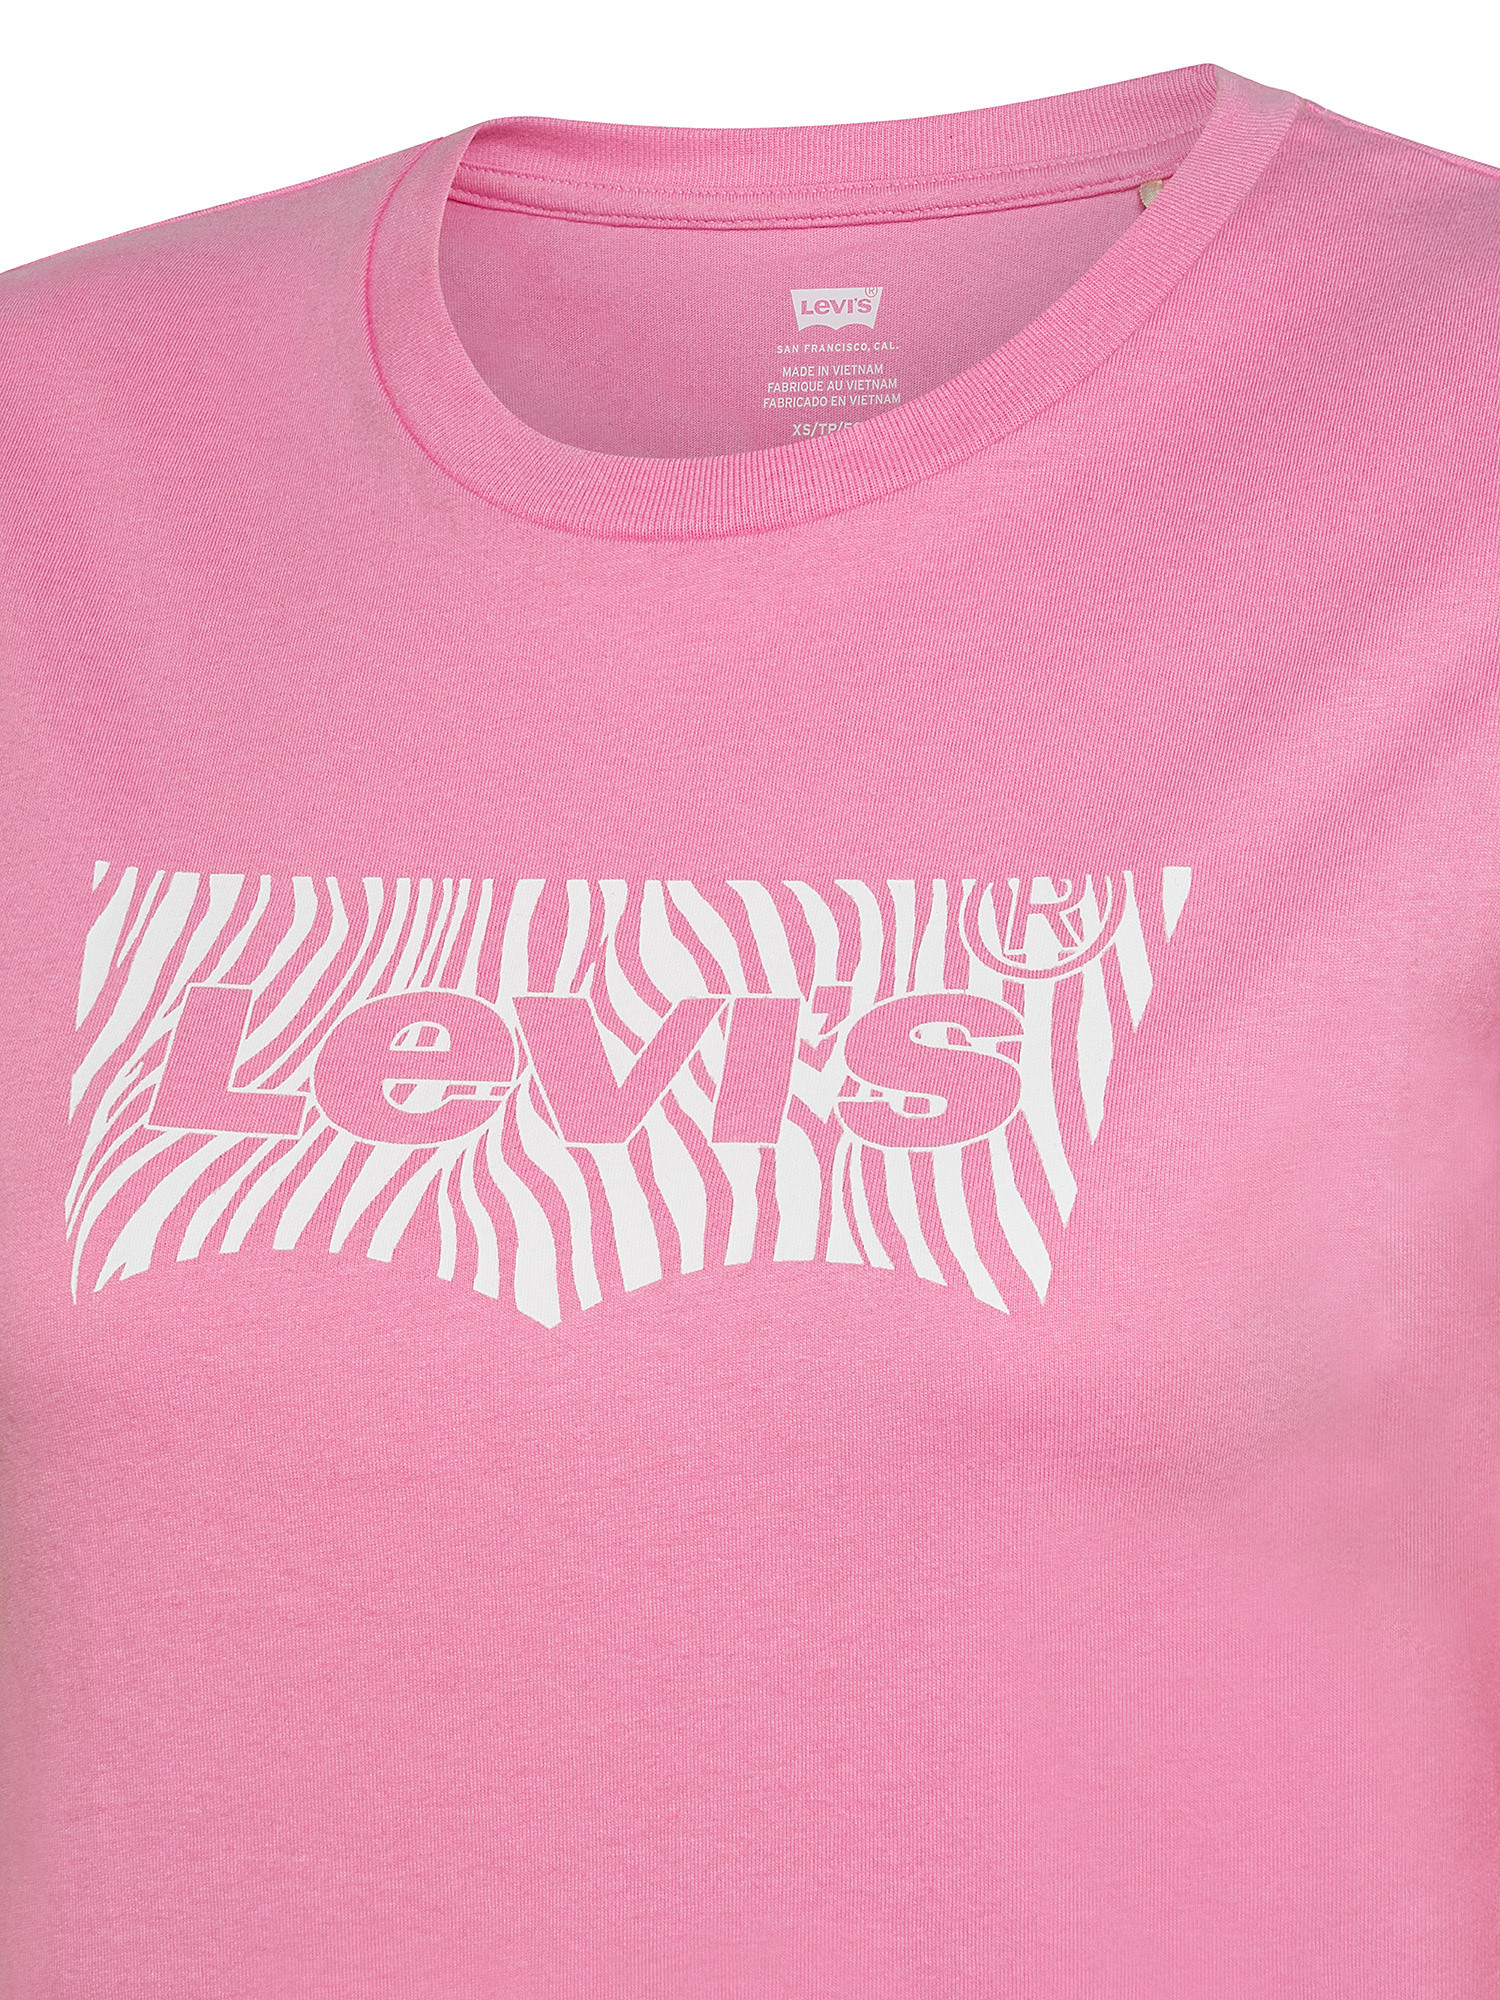 Perfect Tee T-shirt, Pink, large image number 2